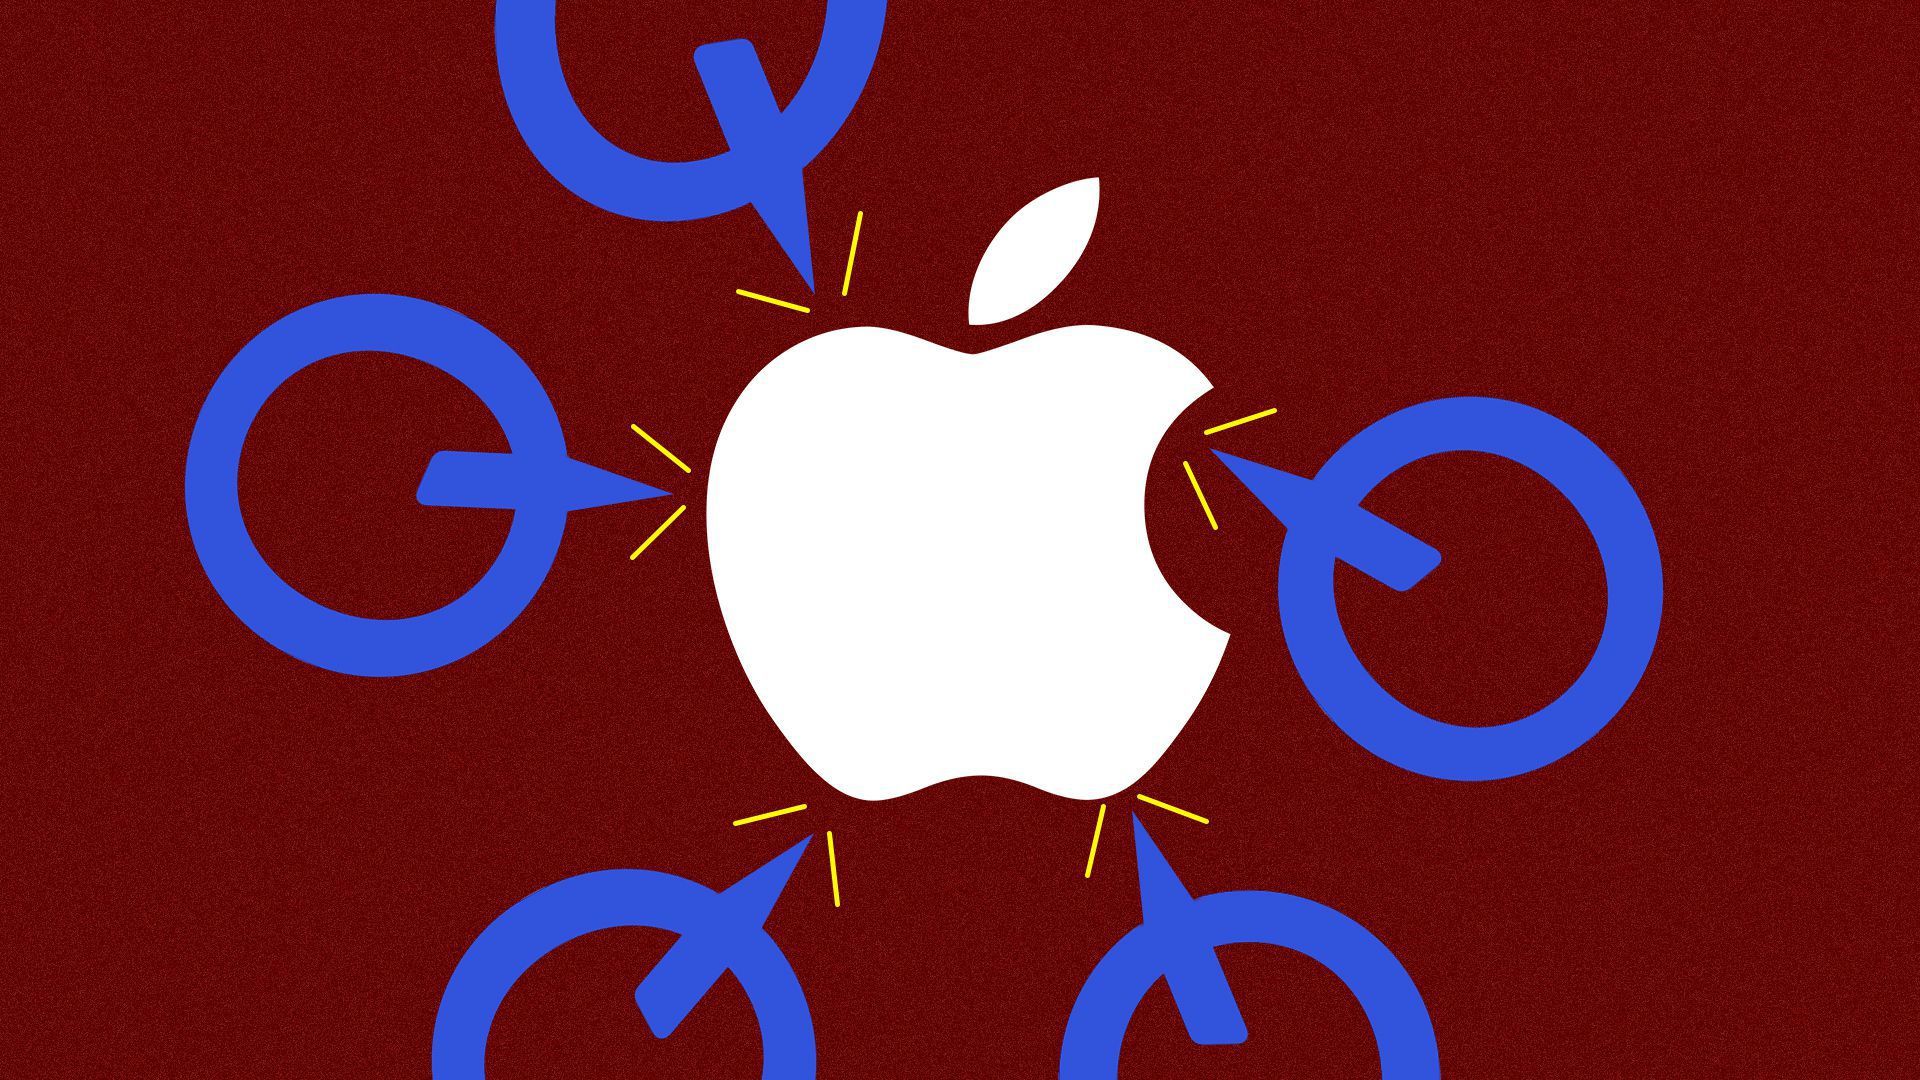 Qualcomm logos attacking an Apple one